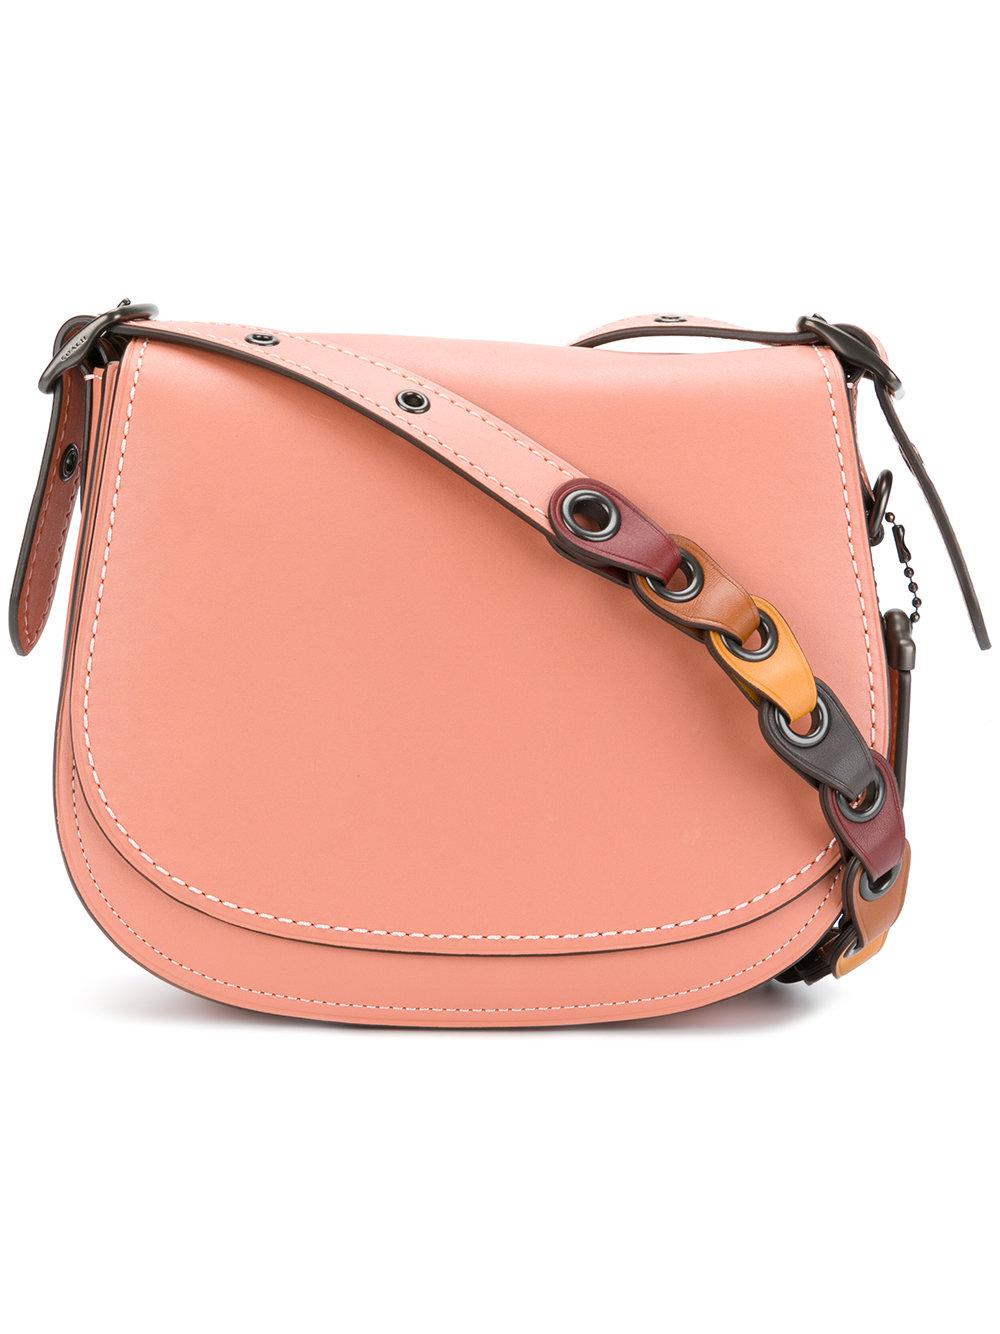 COACH Leather Linked Strap Saddle Bag in Pink & Purple (Pink) - Lyst